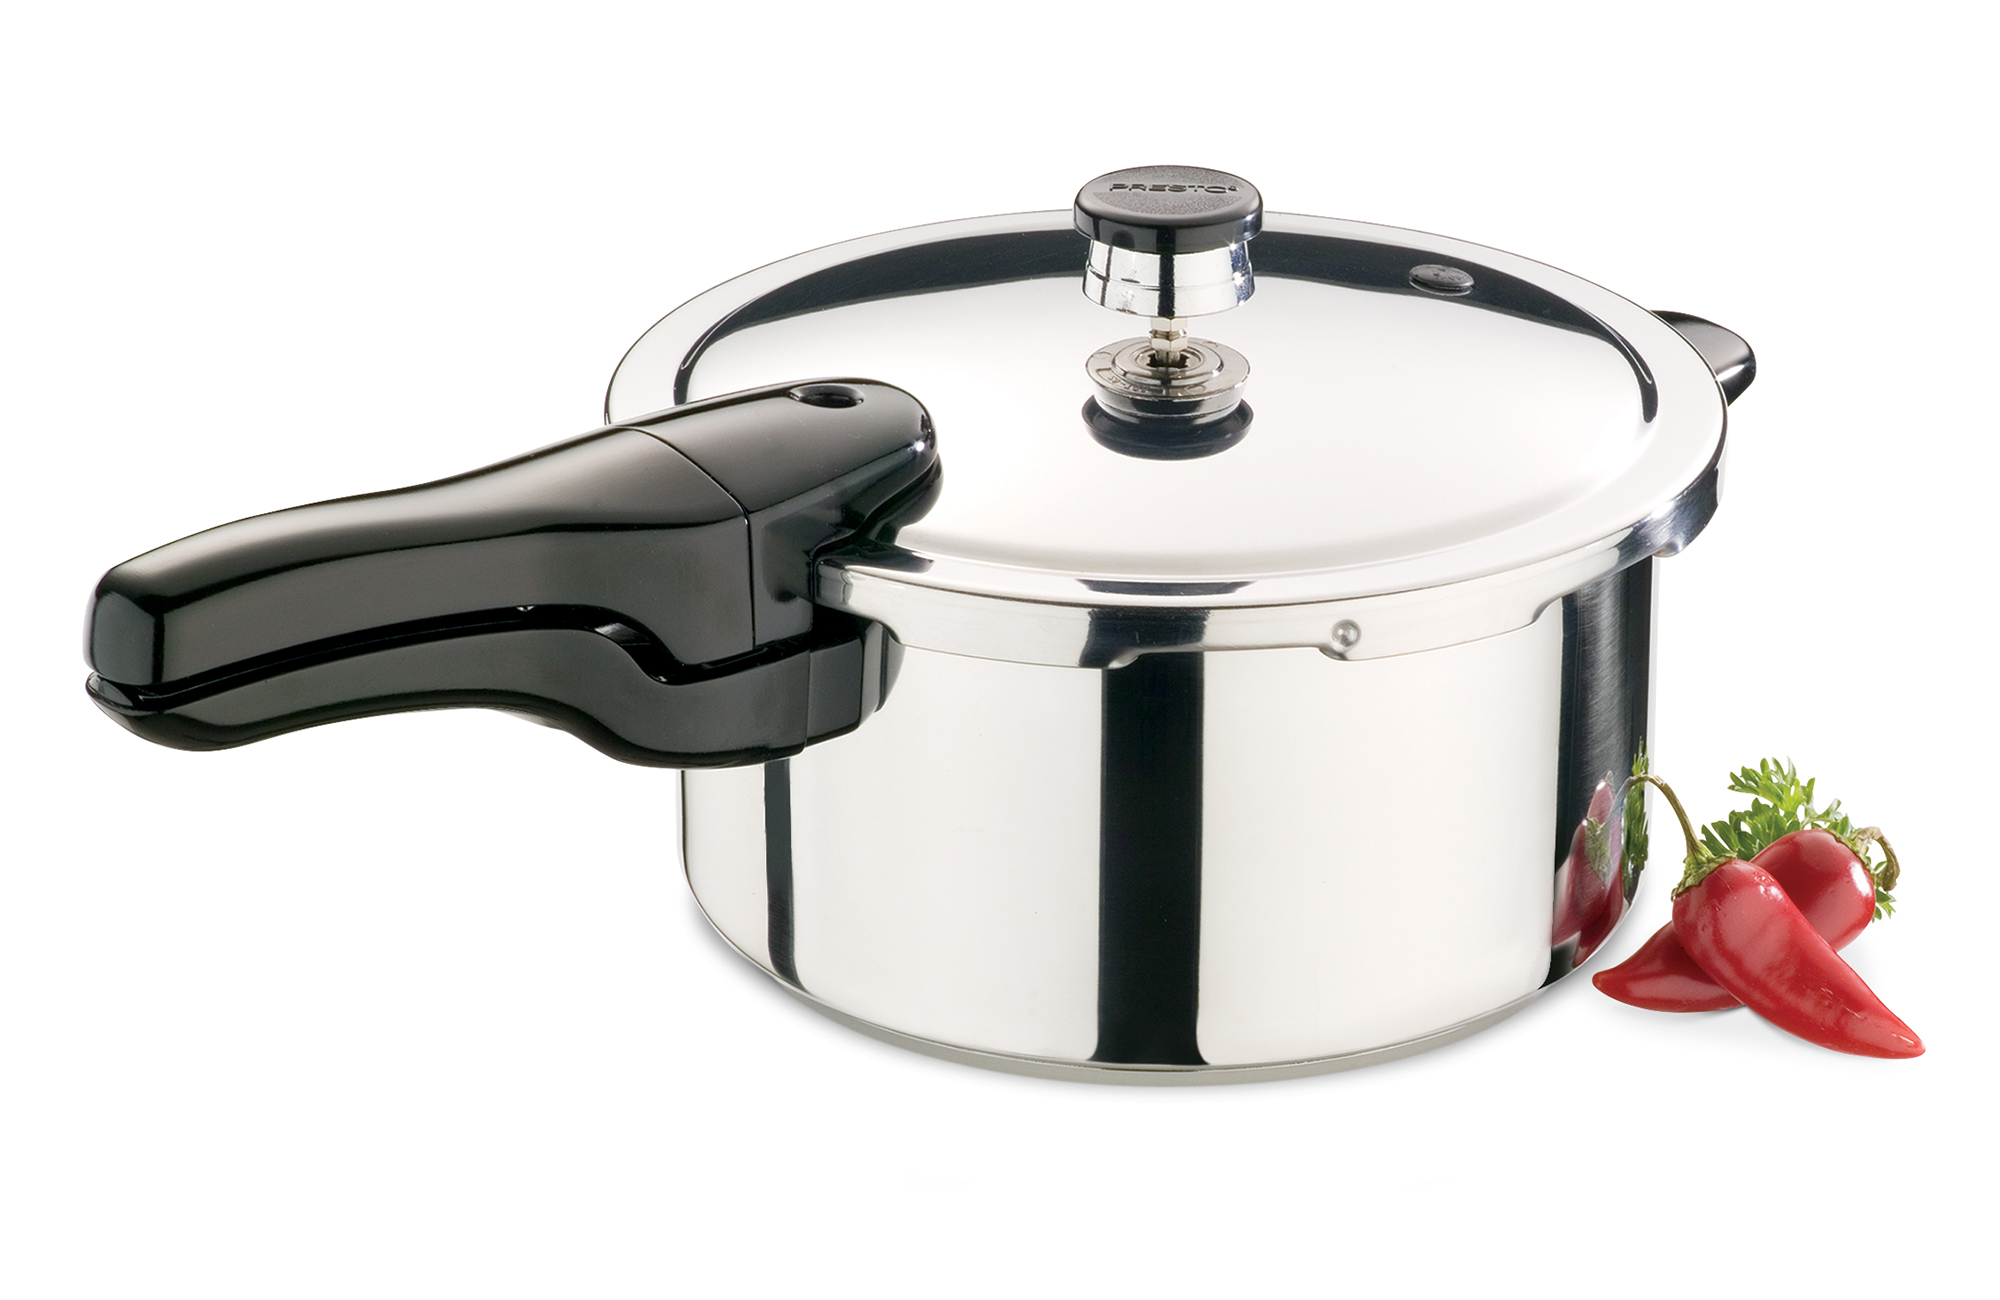 How Does The Pressure Cooker Work | lupon.gov.ph